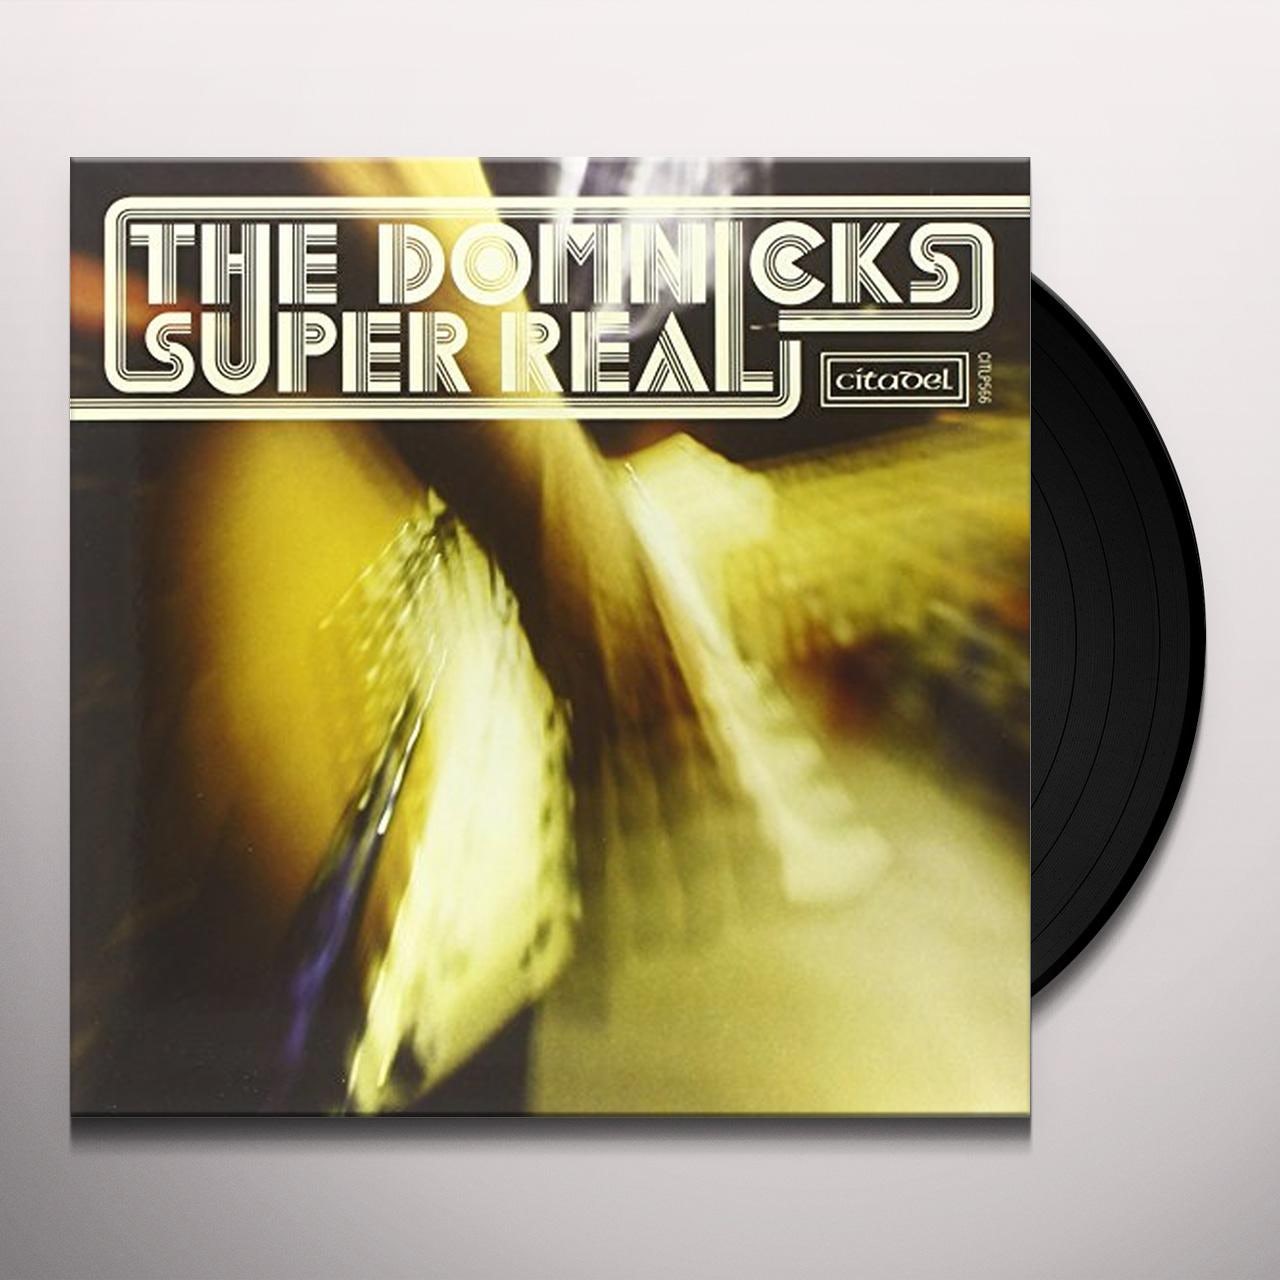 Arcade Sound - THE DOMNICKS - SUPER REAL front cover